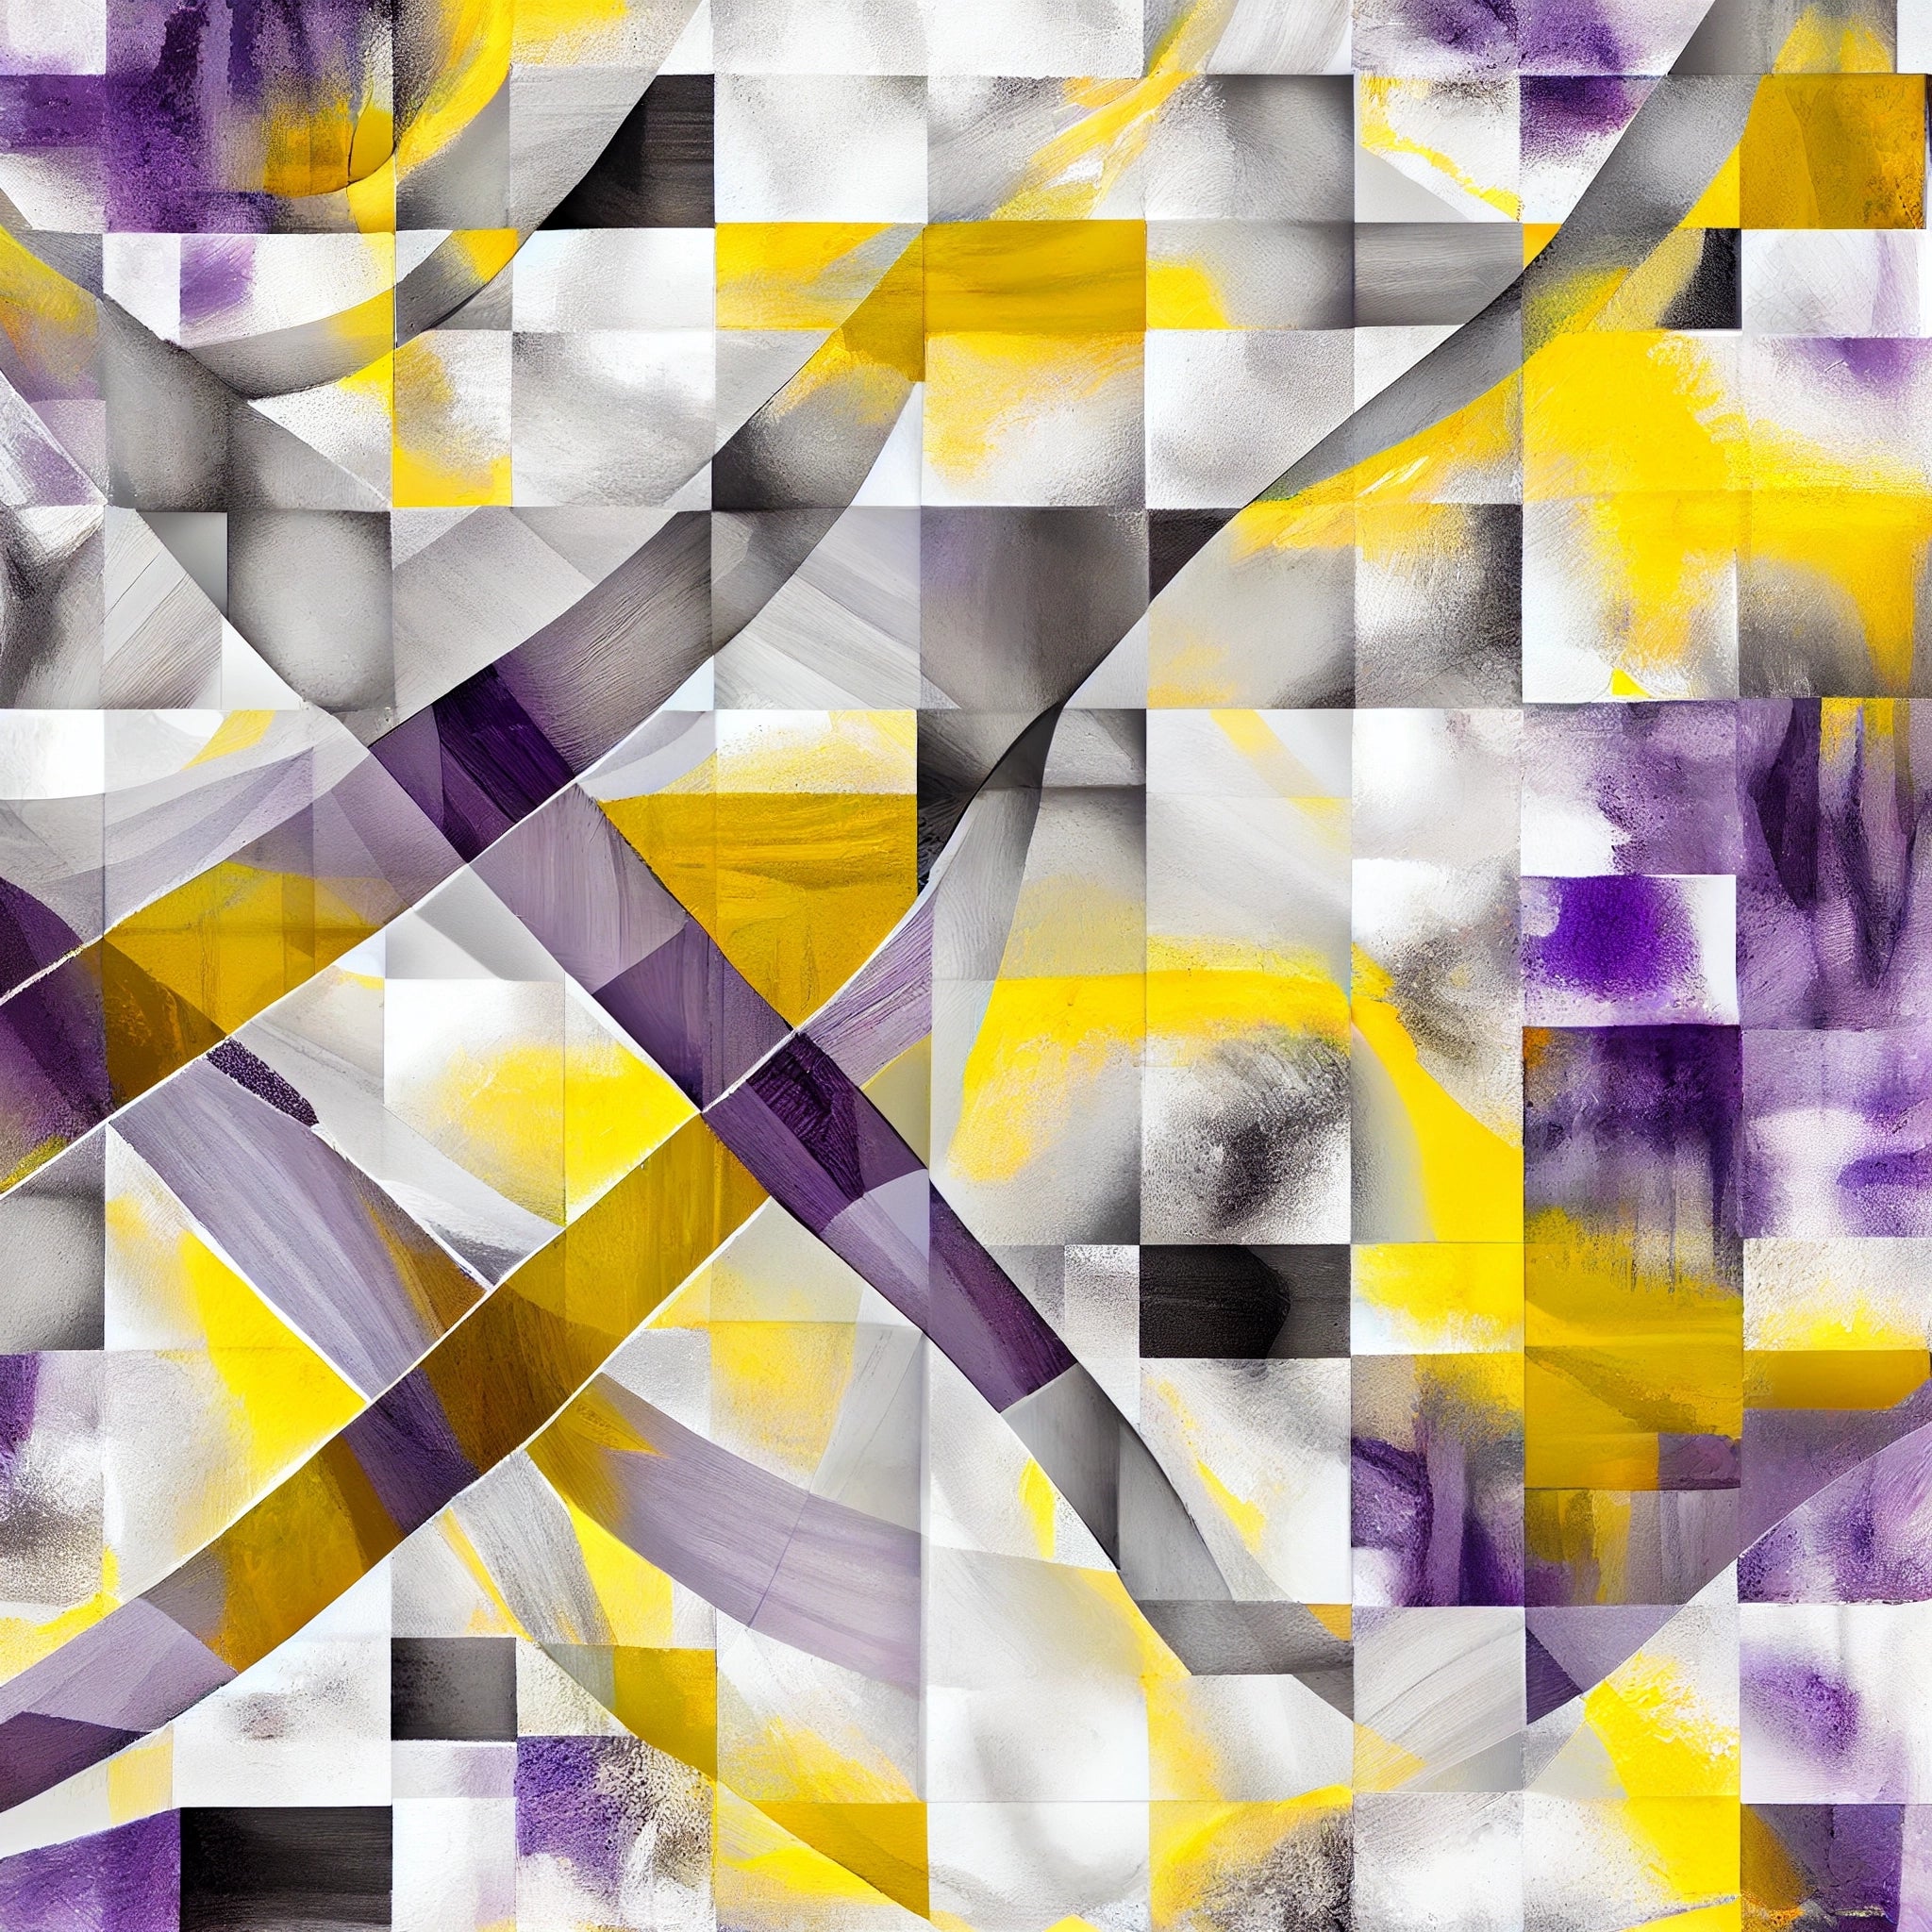 Lavender Dreams: Oil Color Abstract Print in Woven Pattern with Hues of Yellow, Black & White